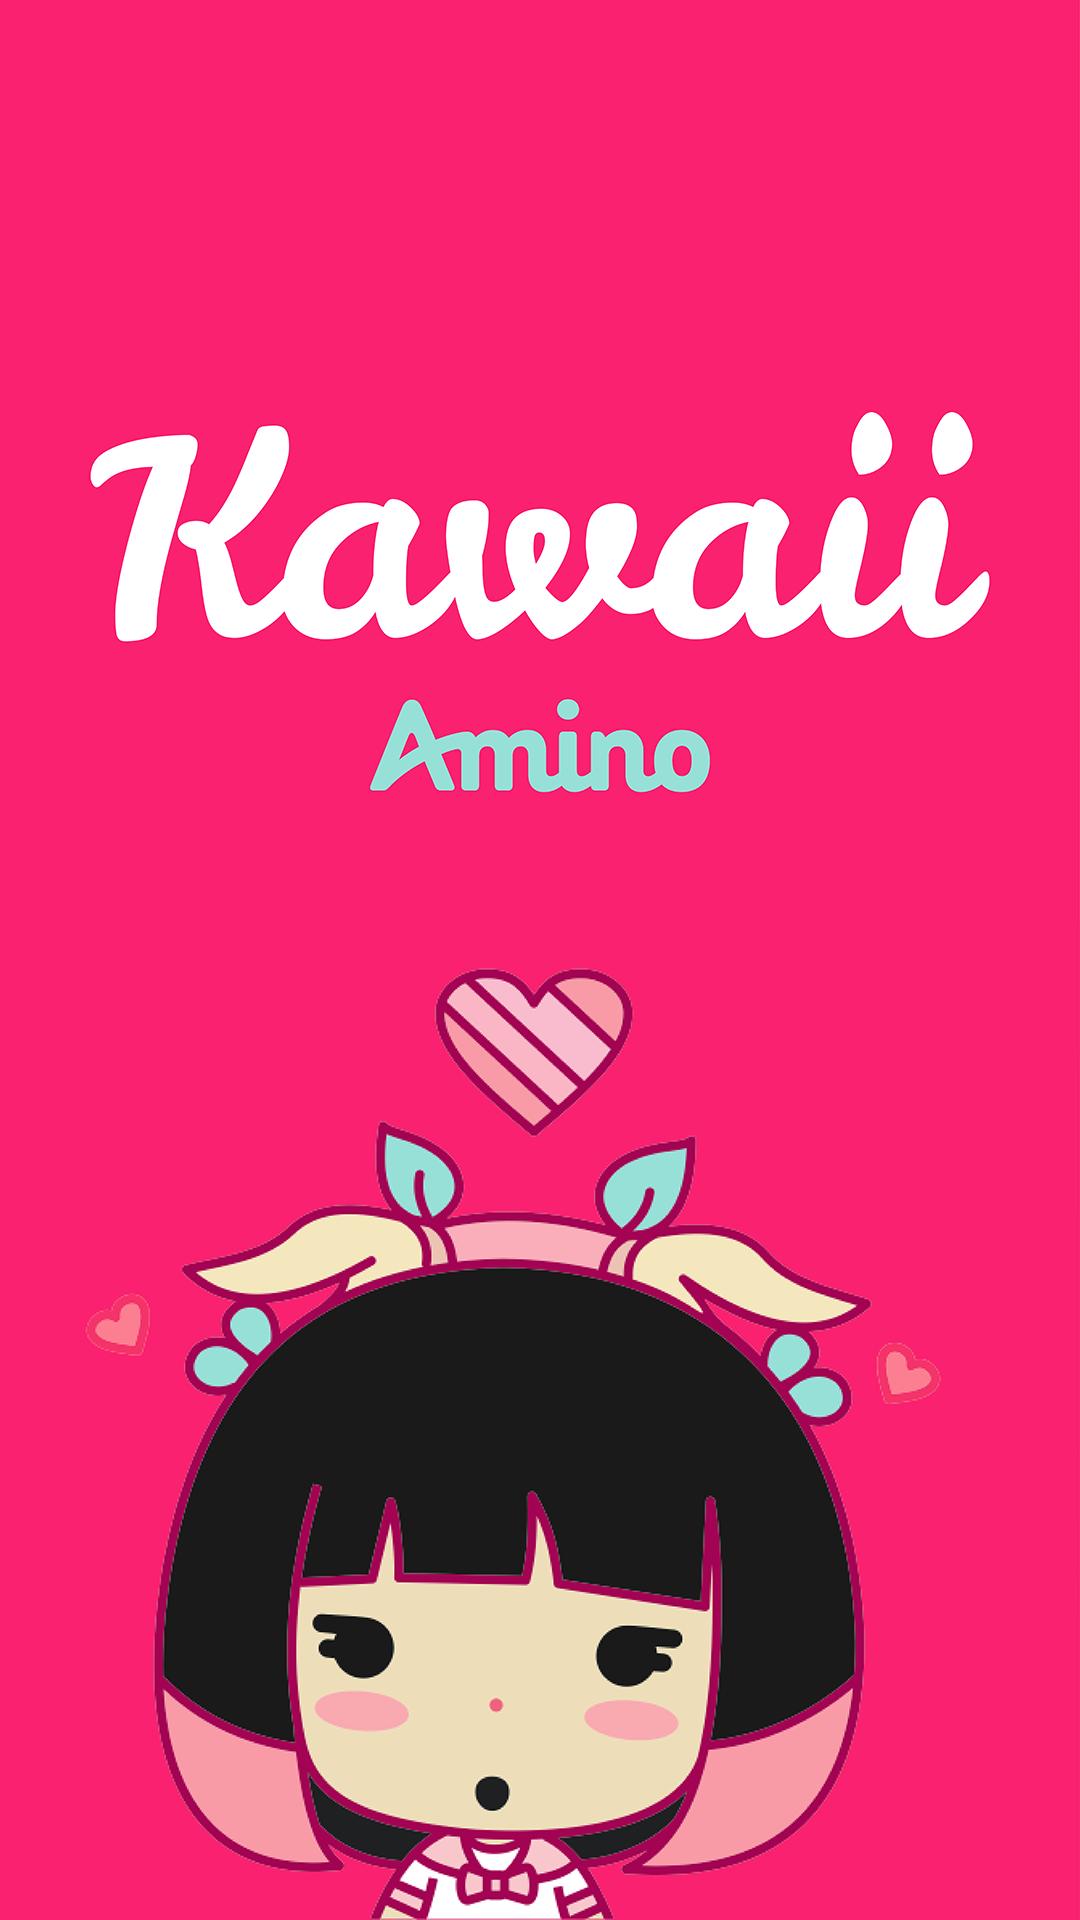 Kawaii For Android Apk Download - fan art wiki roblox amino